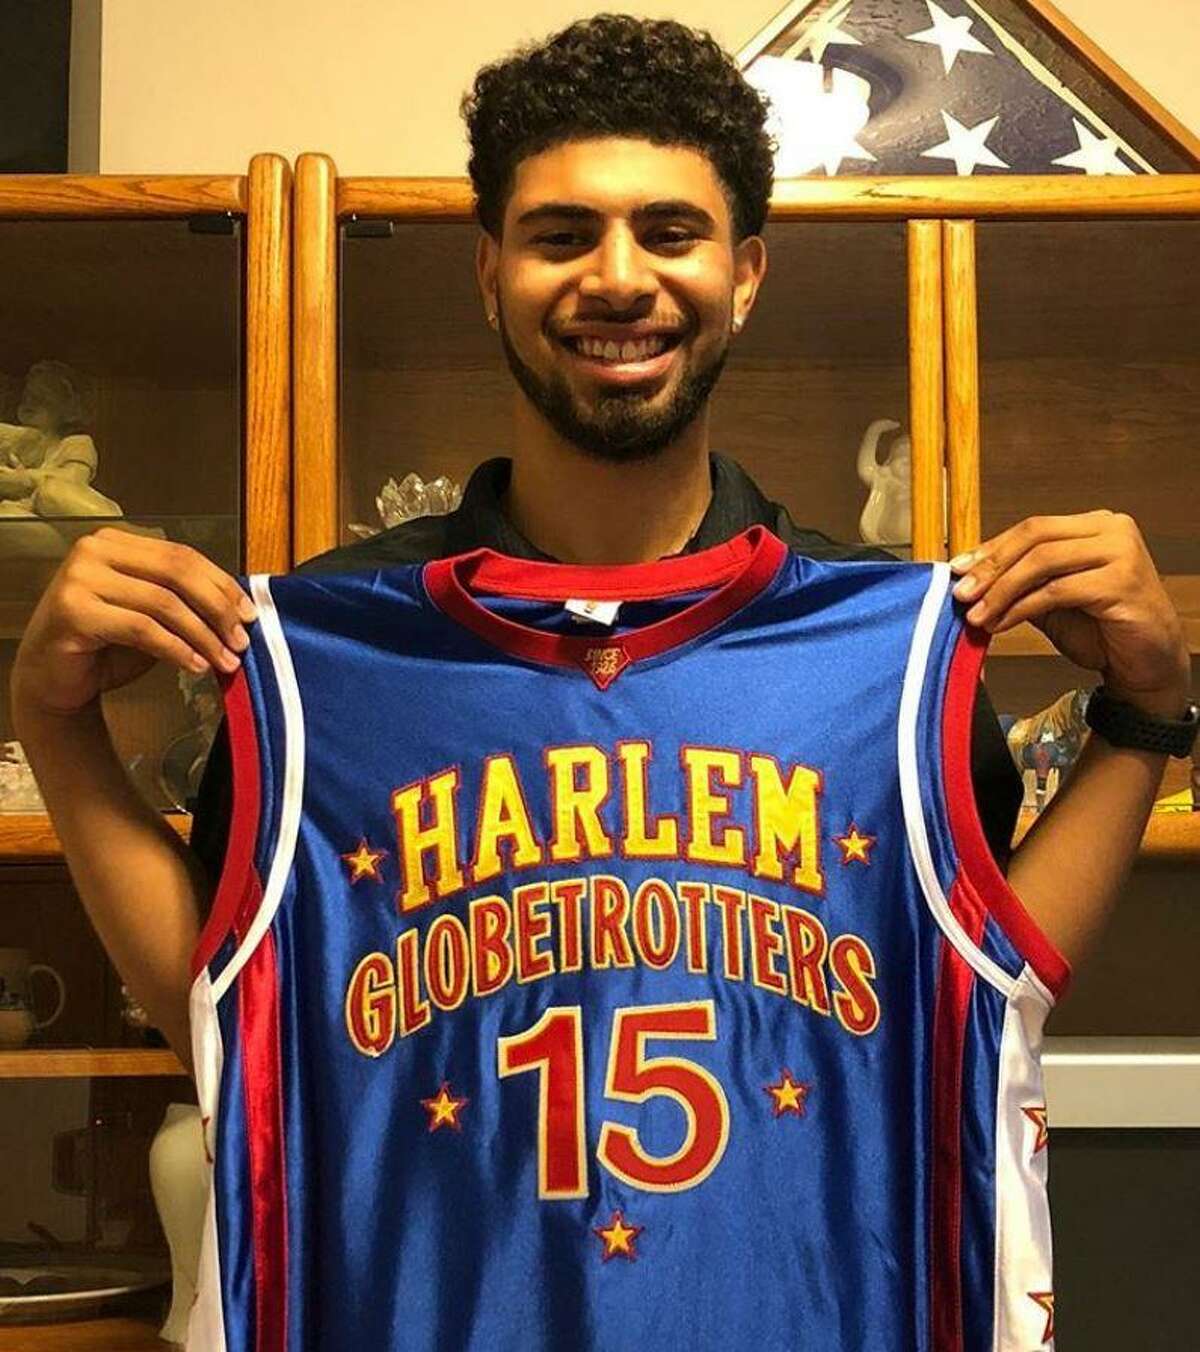 Former Clear Falls standout Louis Dunbar II was recently drafted by the Harlem Globetrotters. His father, Louis Dunbar, played at the University of Houston and with the Globetrotters for 27 years.